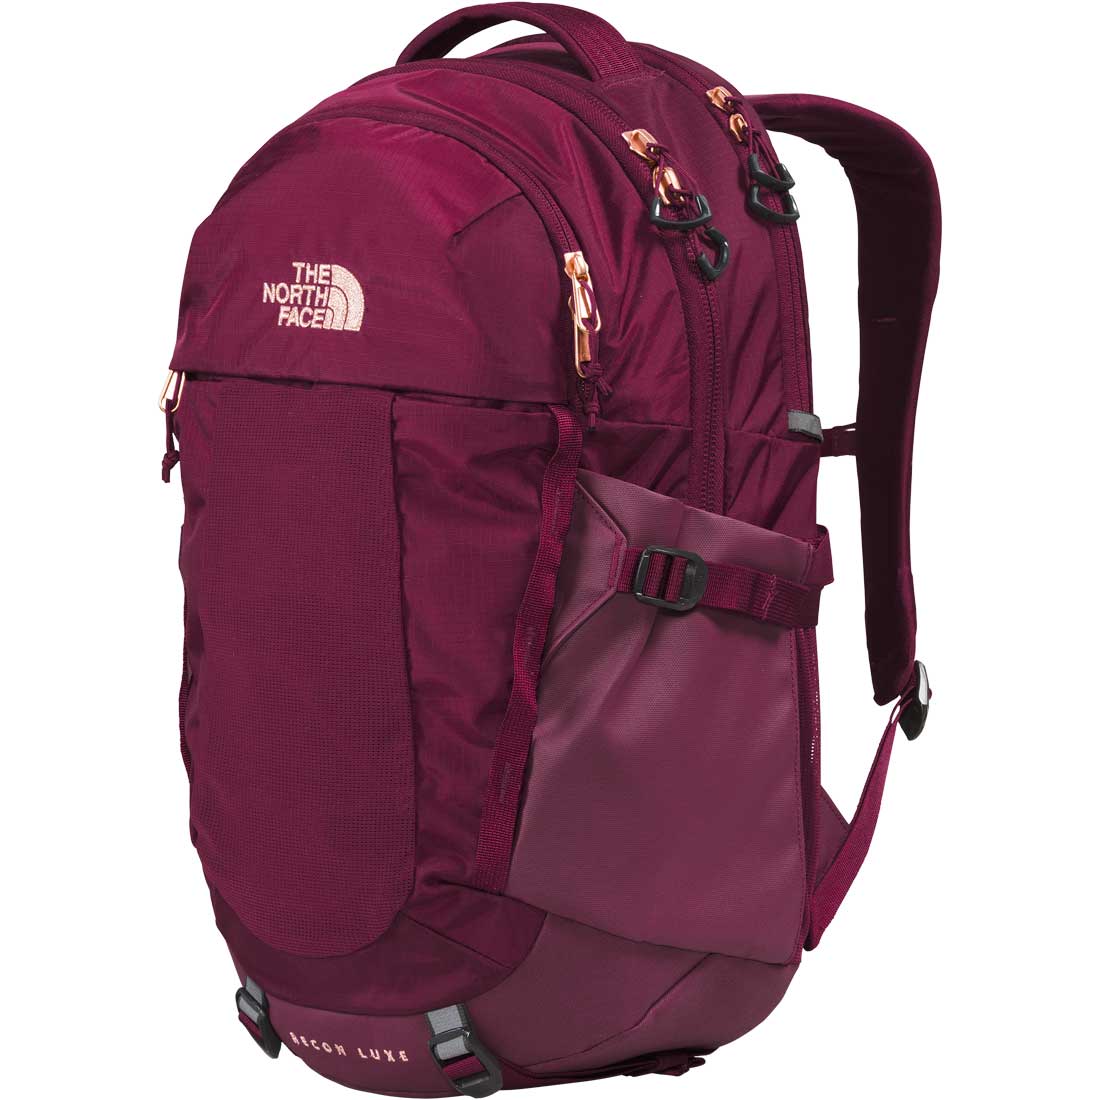 The North Face Recon Luxe Backpack - Women's